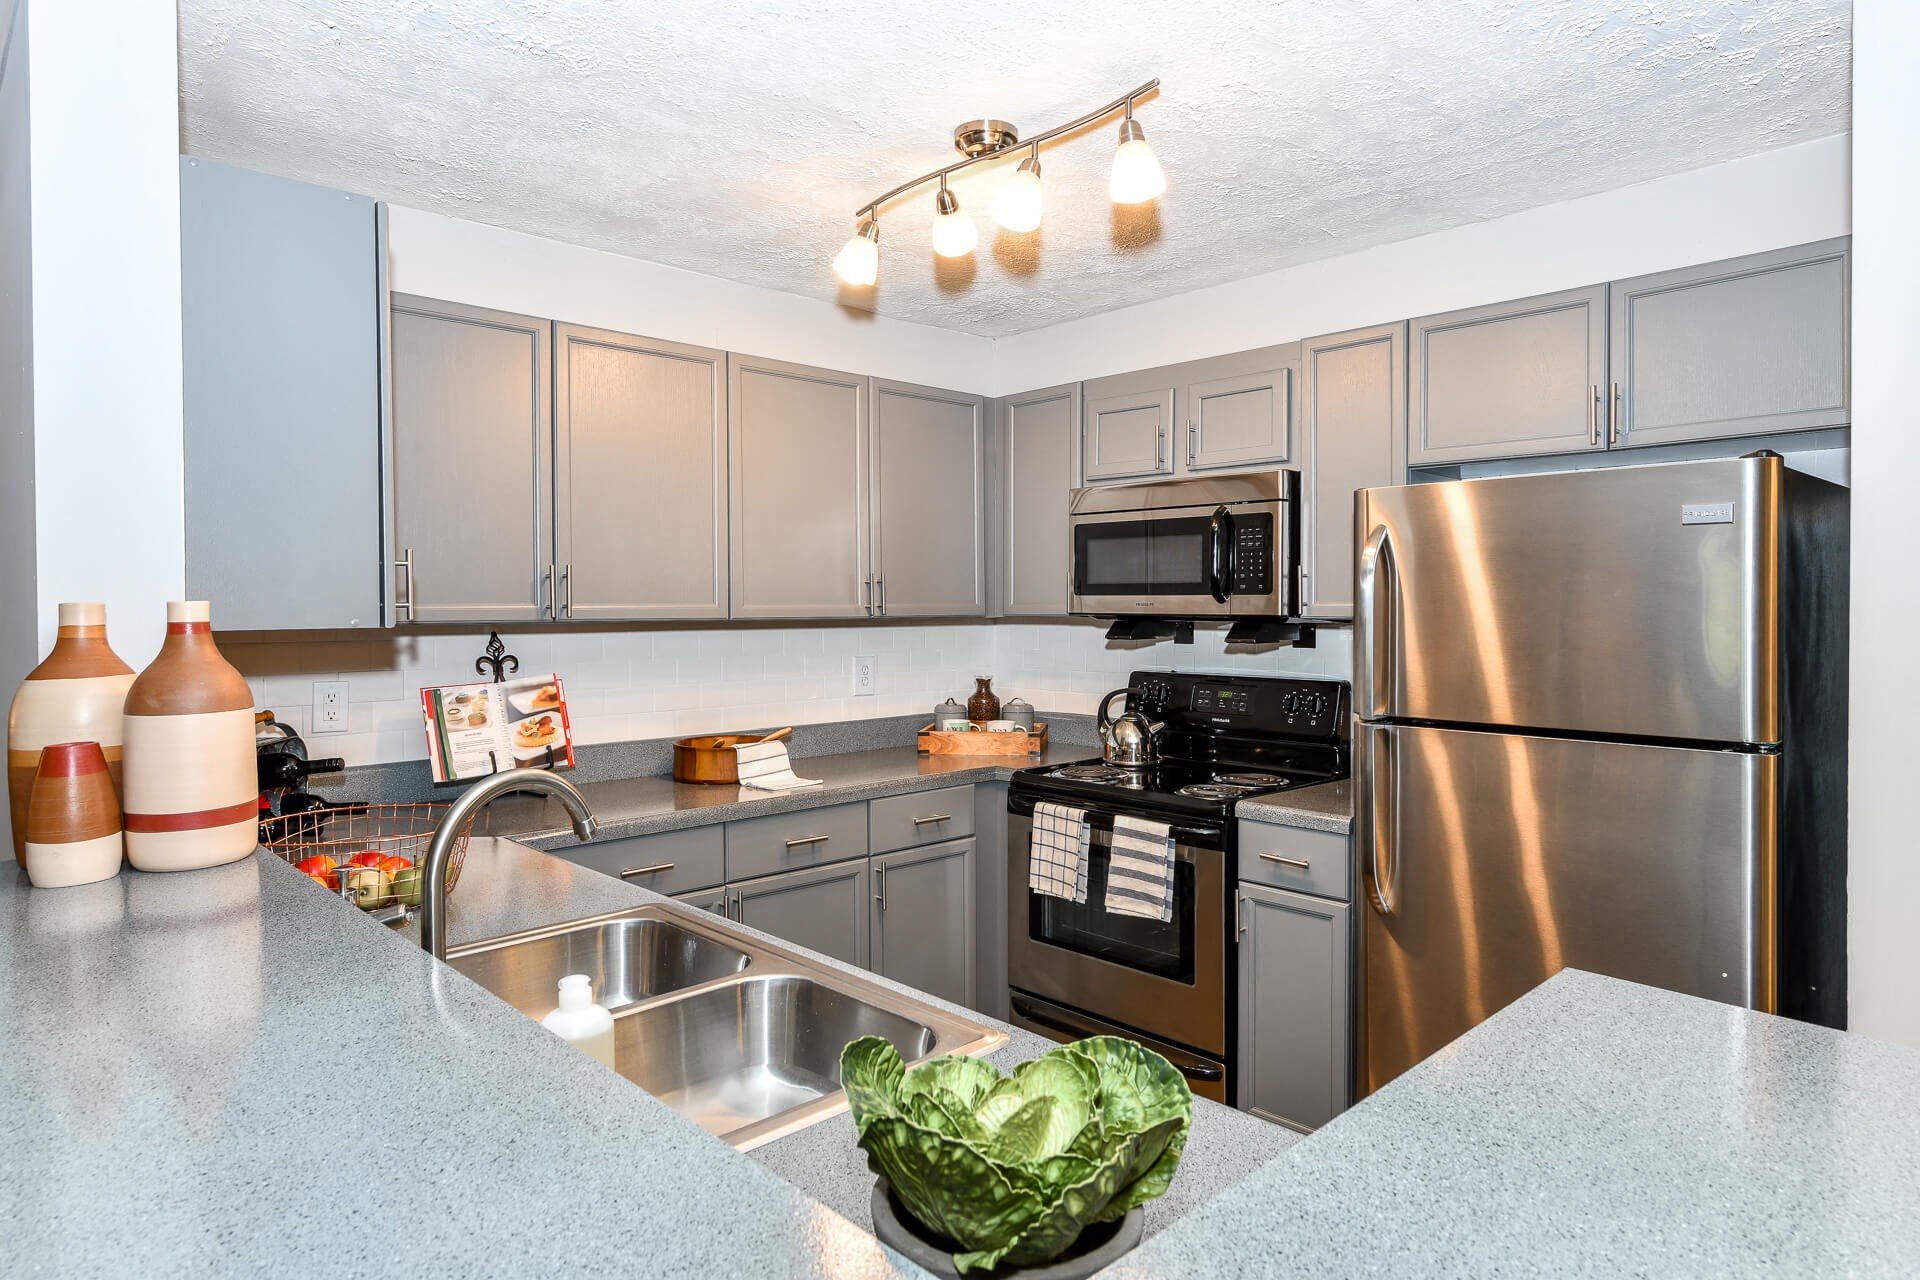 Newly Renovated Interiors Including Stainless Steel Appliances, at Crestmark Apartment Homes, Lithia Springs, GA 30122